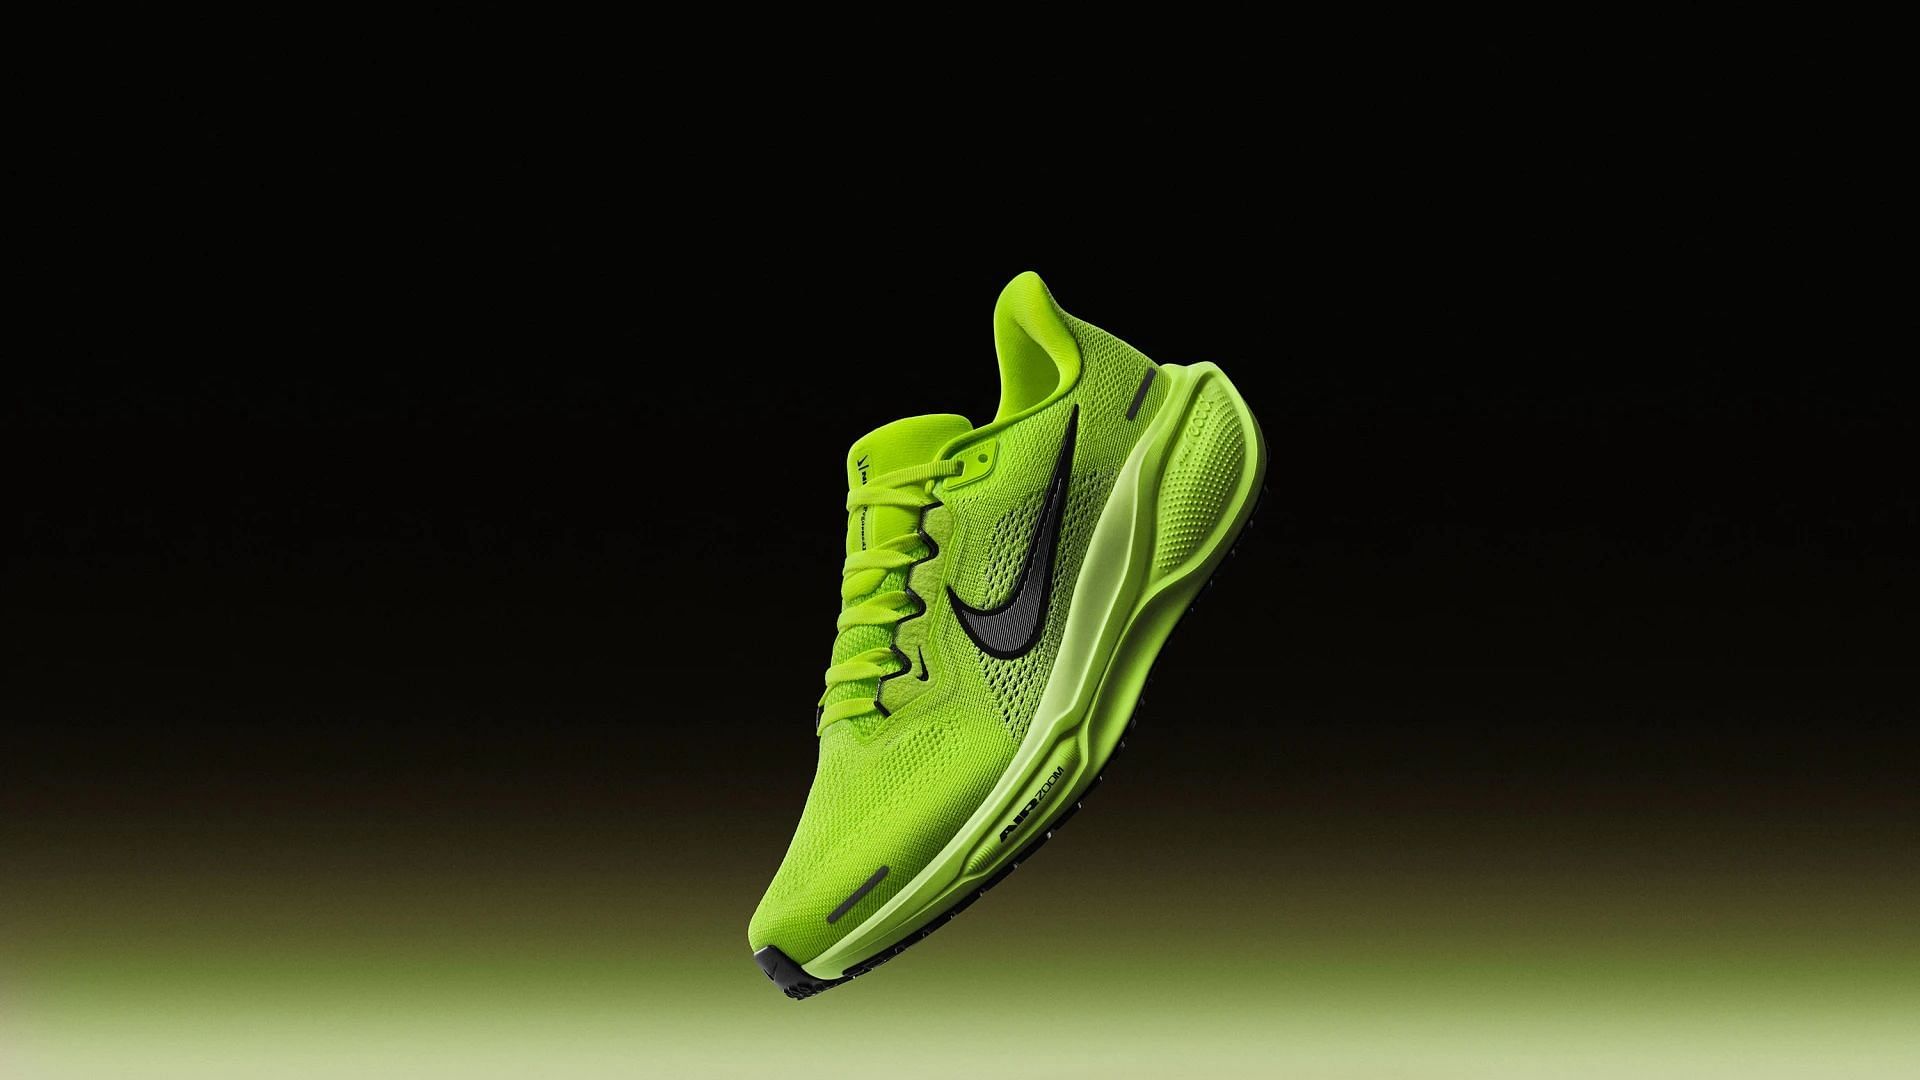 Nike Pegasus 41 running shoes: Features explored